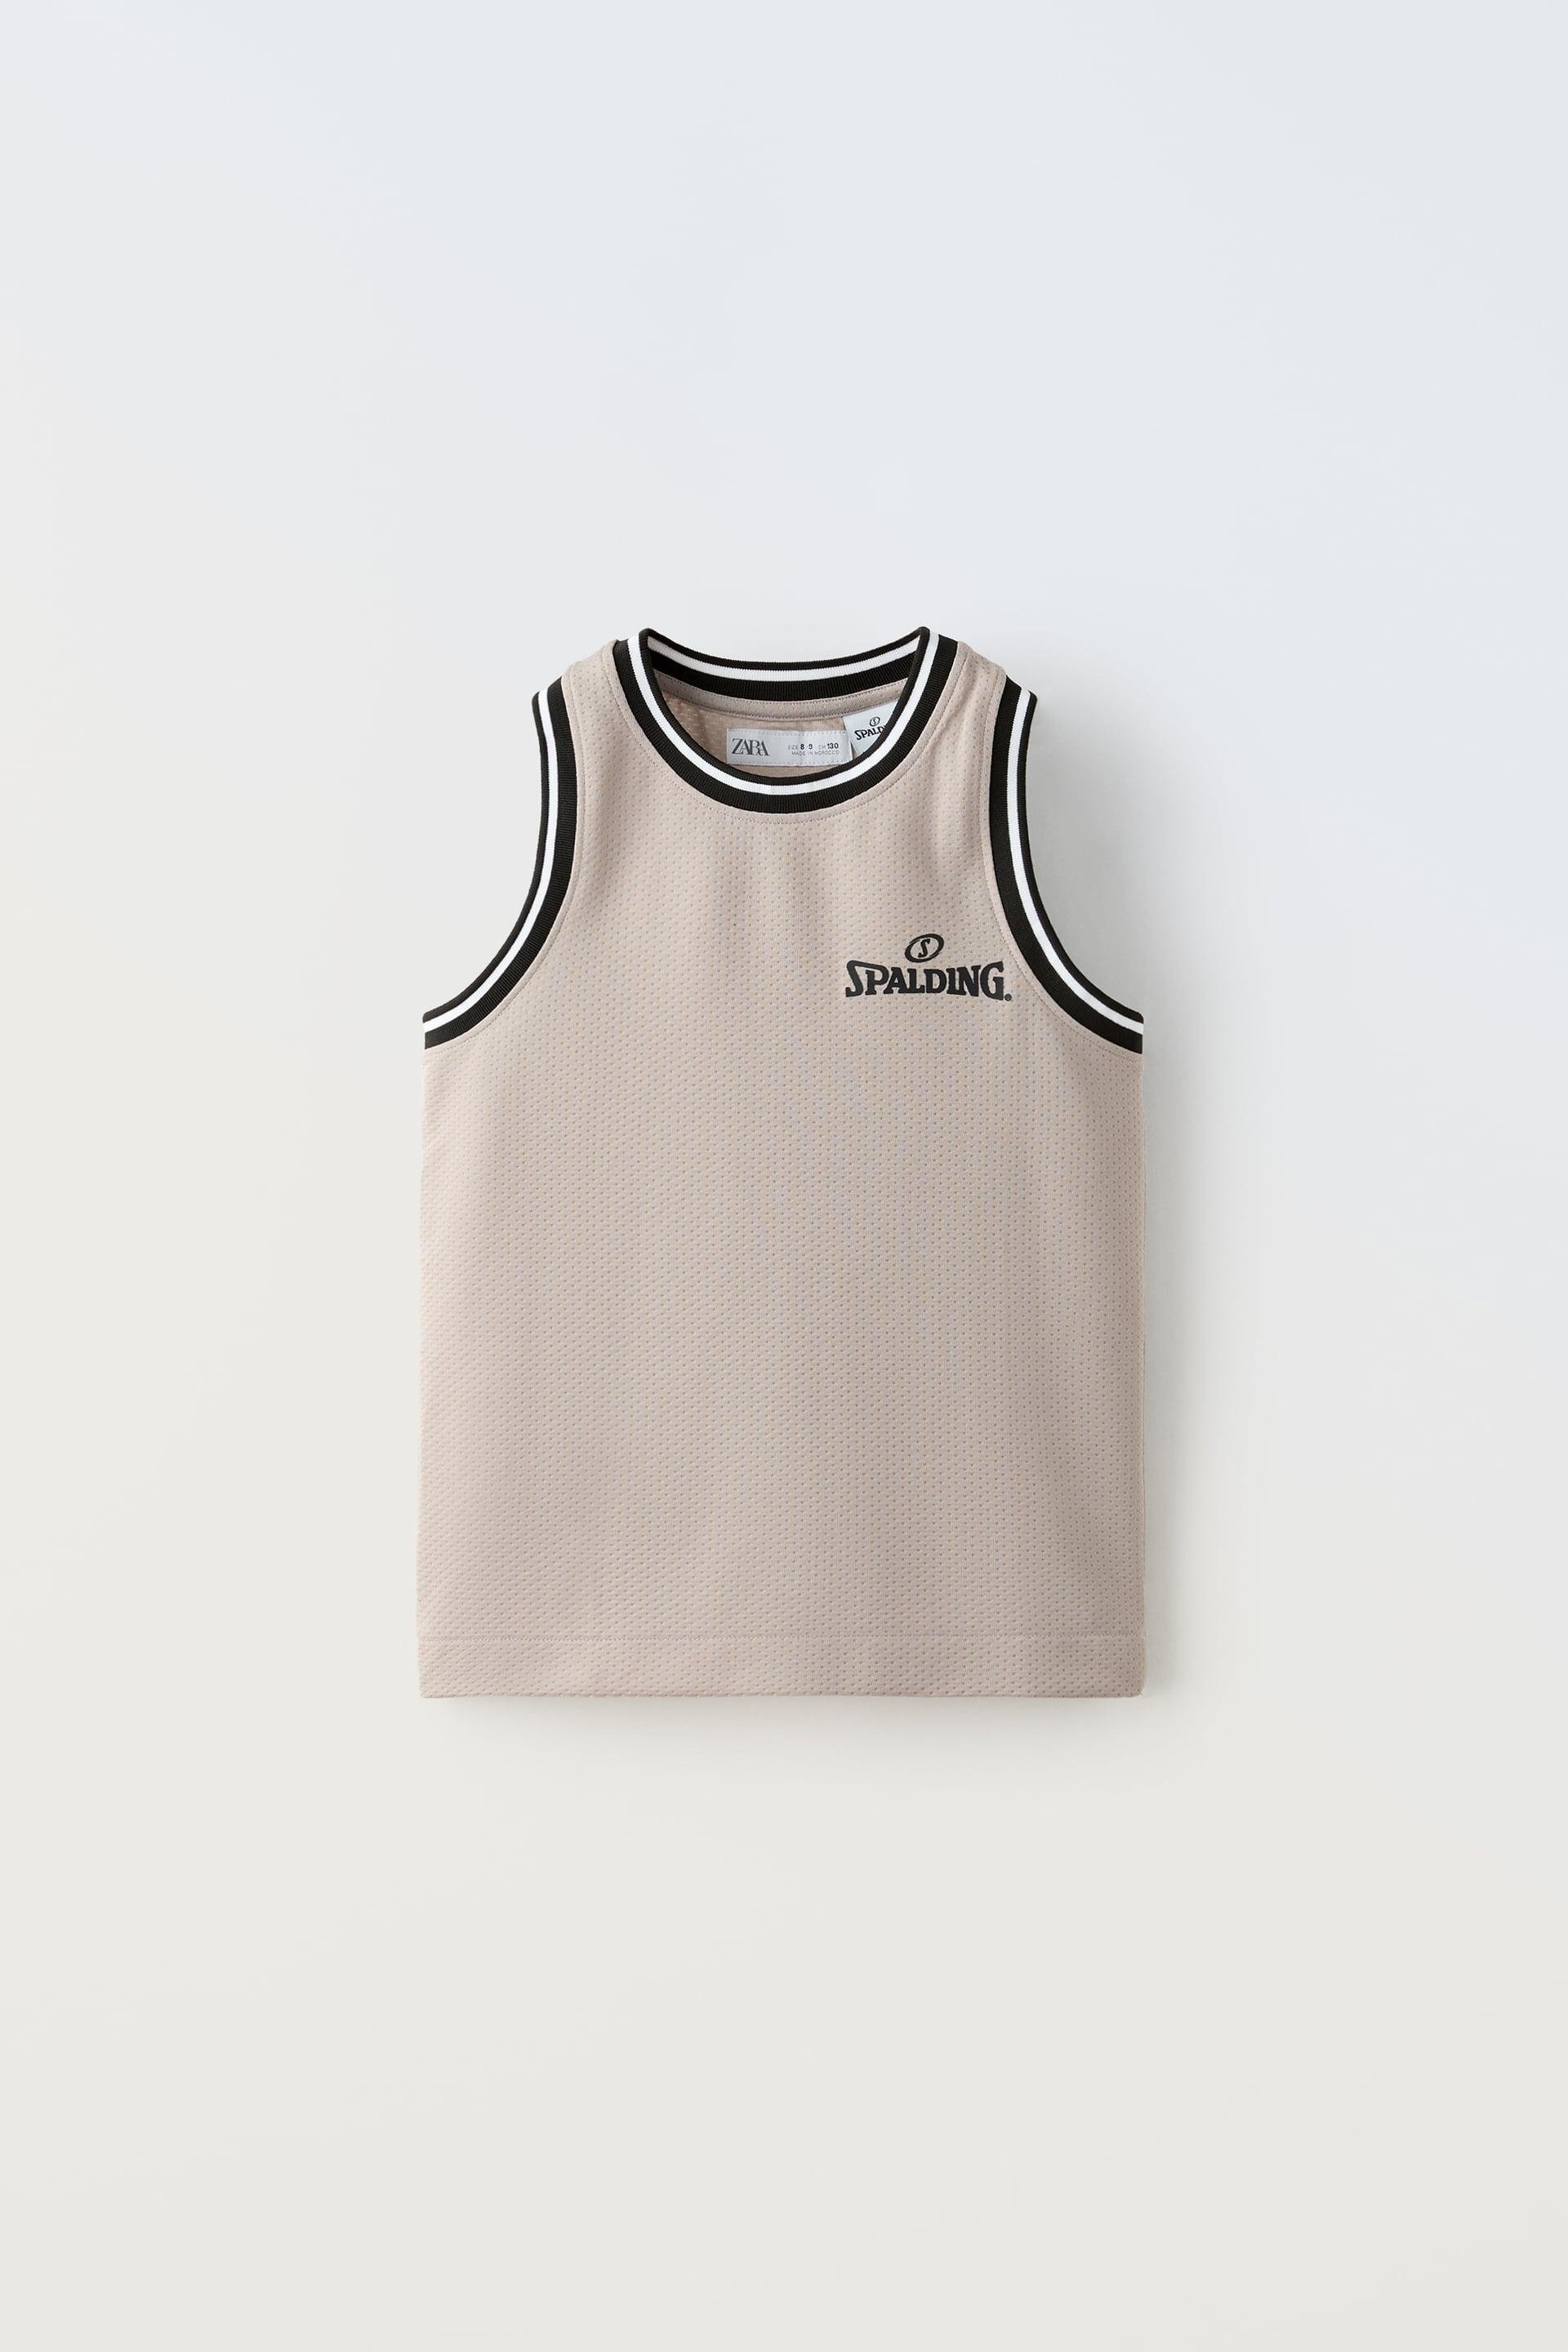 SPALDING ® PIPED TANK TOP by ZARA